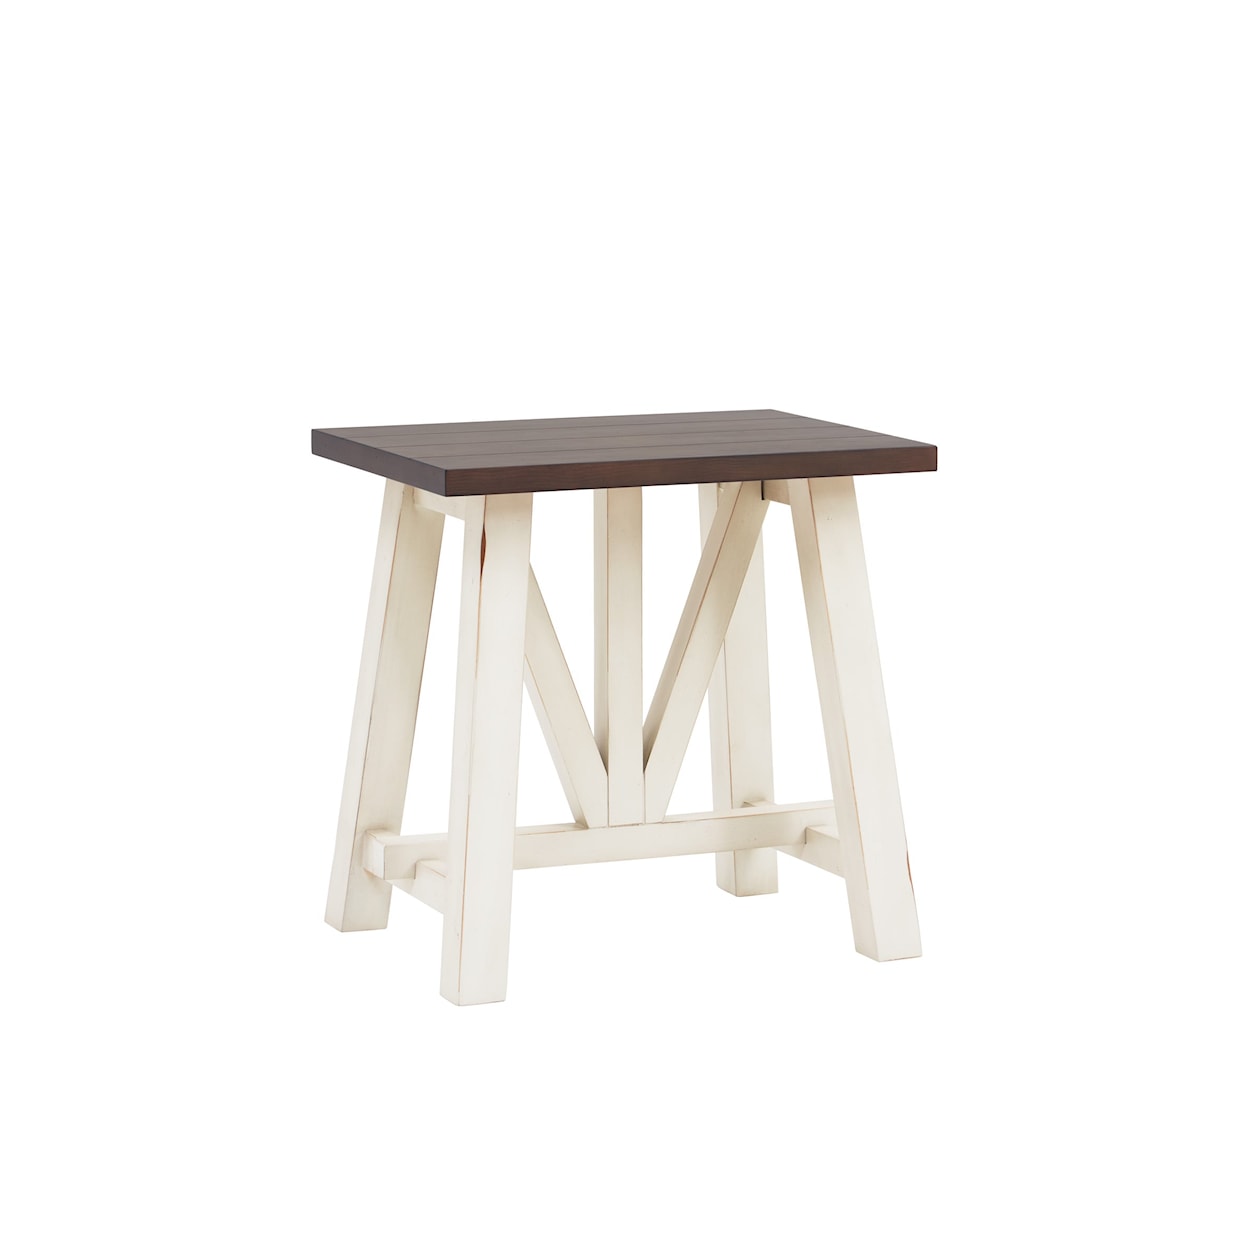 Aspenhome Pinebrook Chairside Table